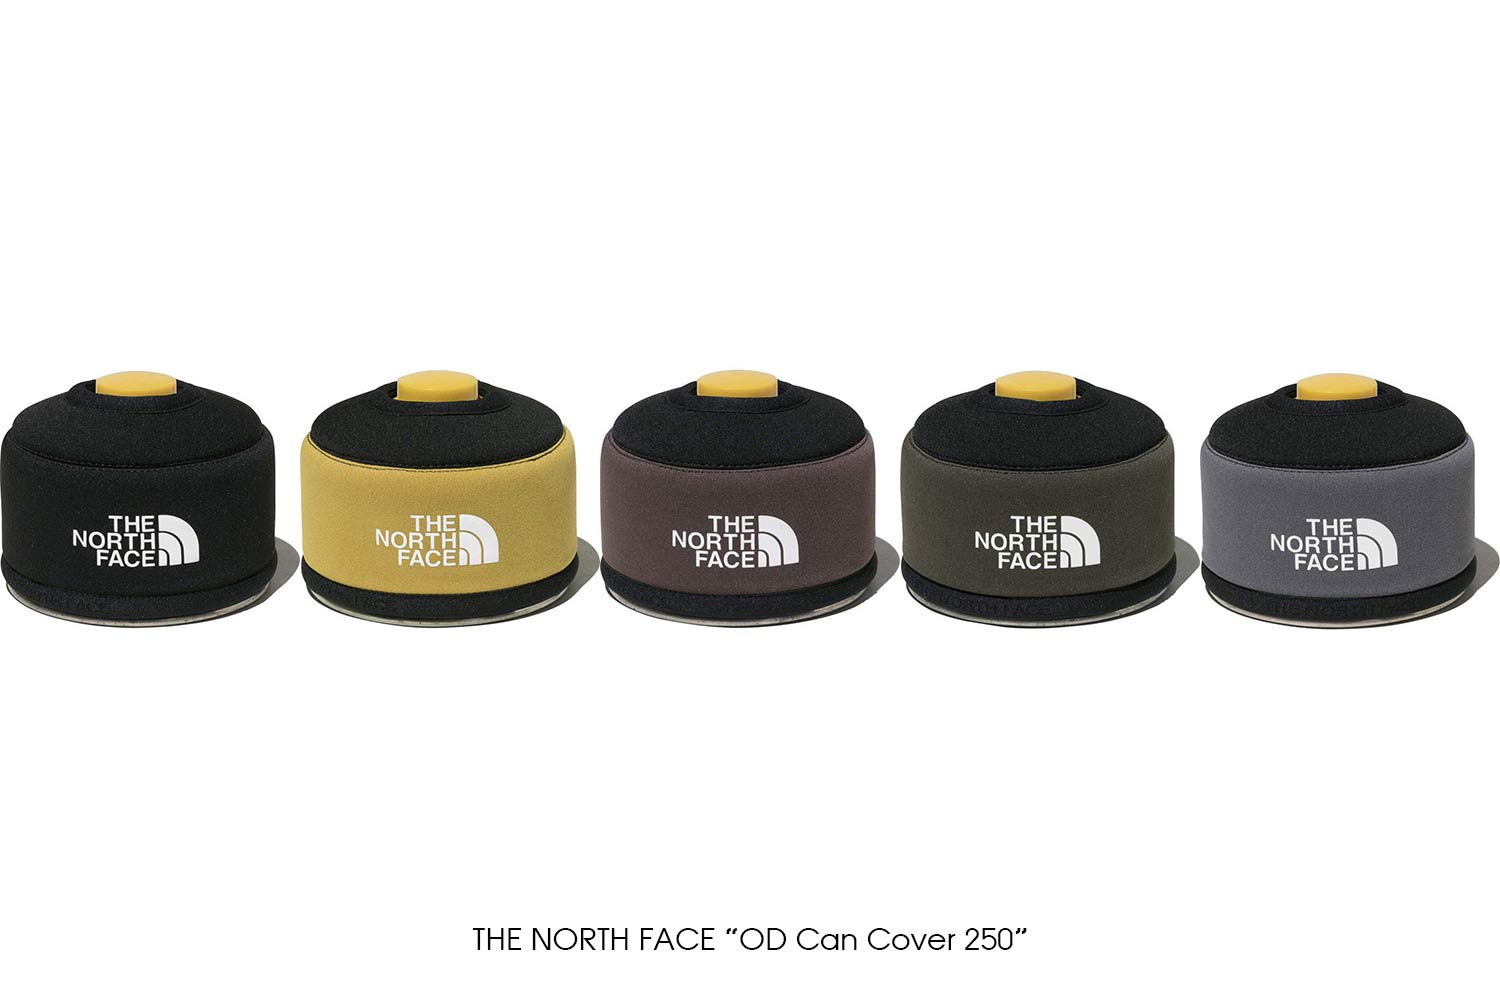 THE NORTH FACE "OD Can Cover 250"